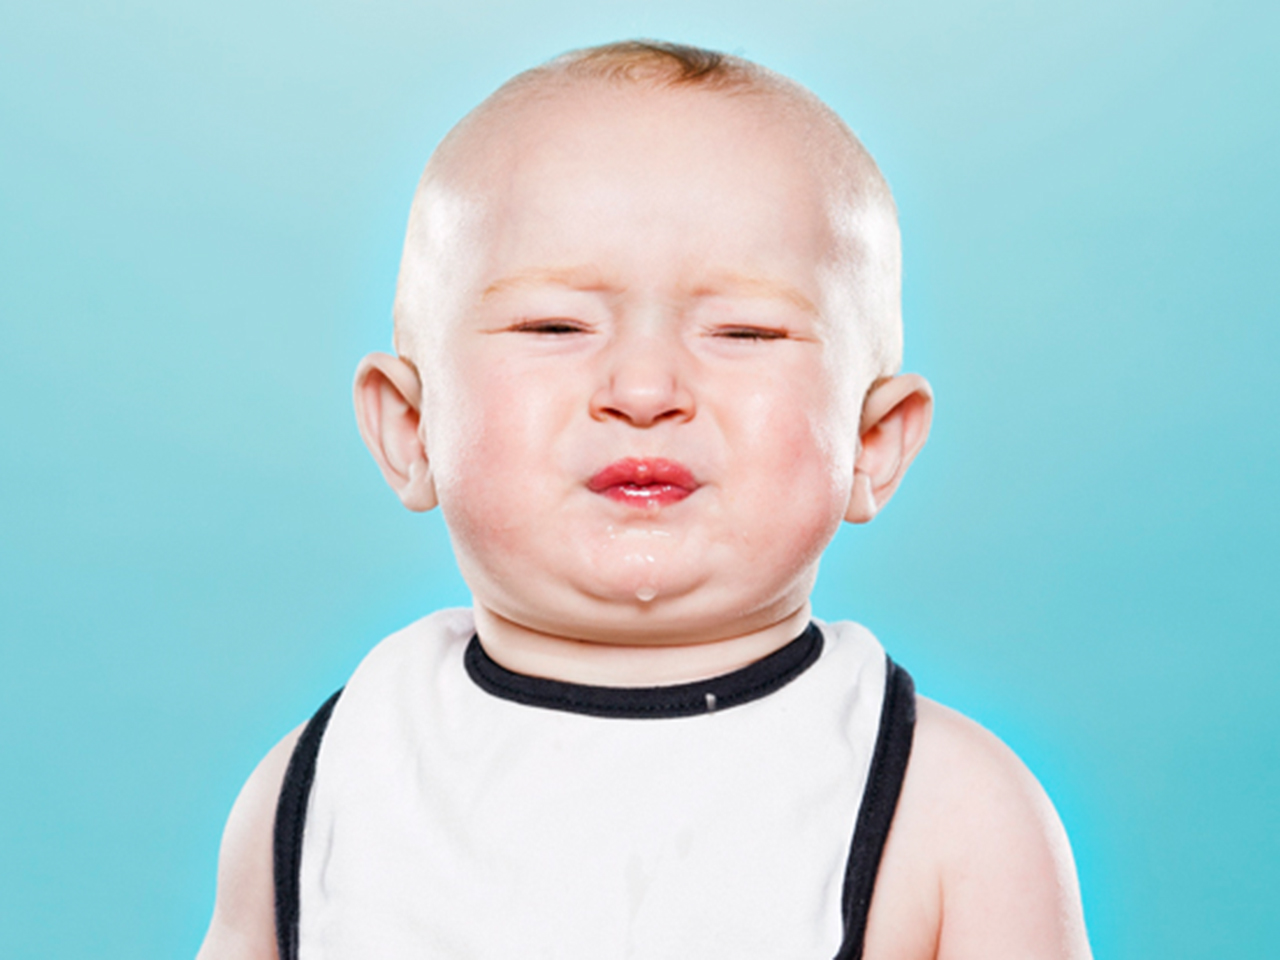 Pucker up: Kids tasting lemons for the first time - TODAY.com1280 x 960